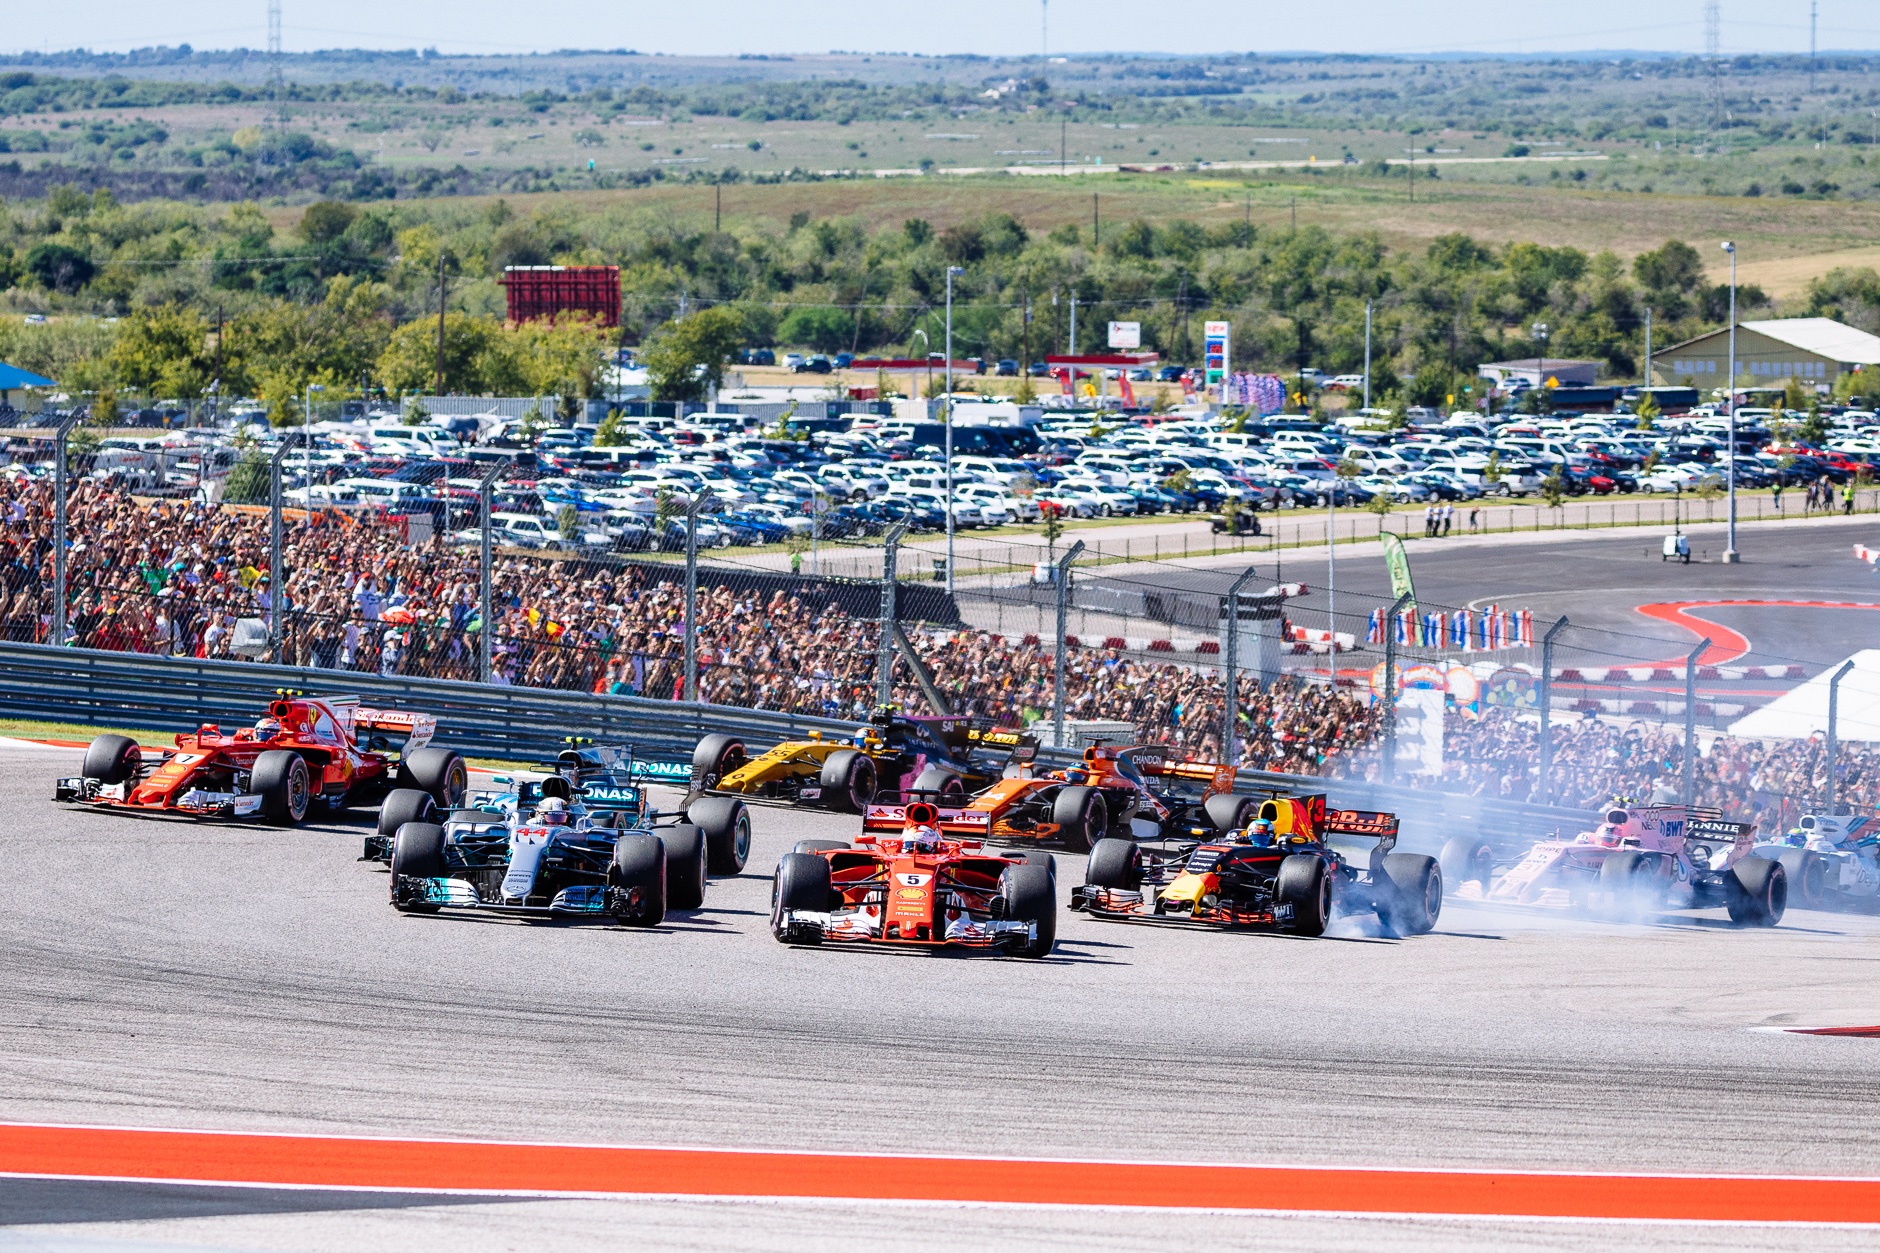 The field enters turn 1 at the start of the 2017 U.S. Grand Prix.